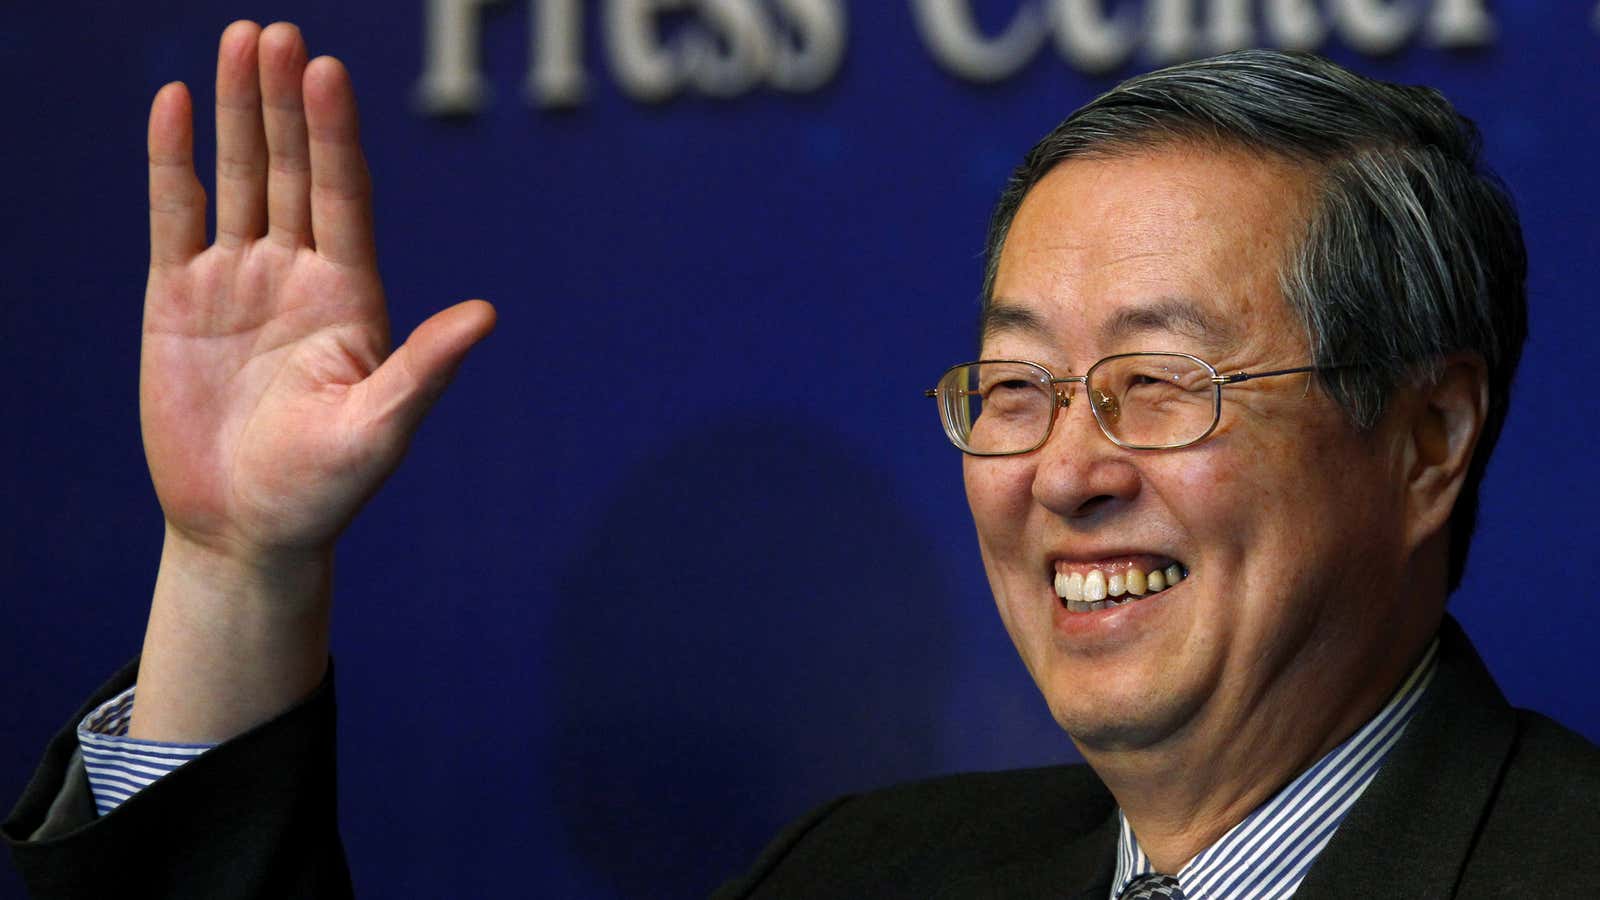 Props to PBOC head Zhou Xiaochuan for amassing $163 billion on the sly.